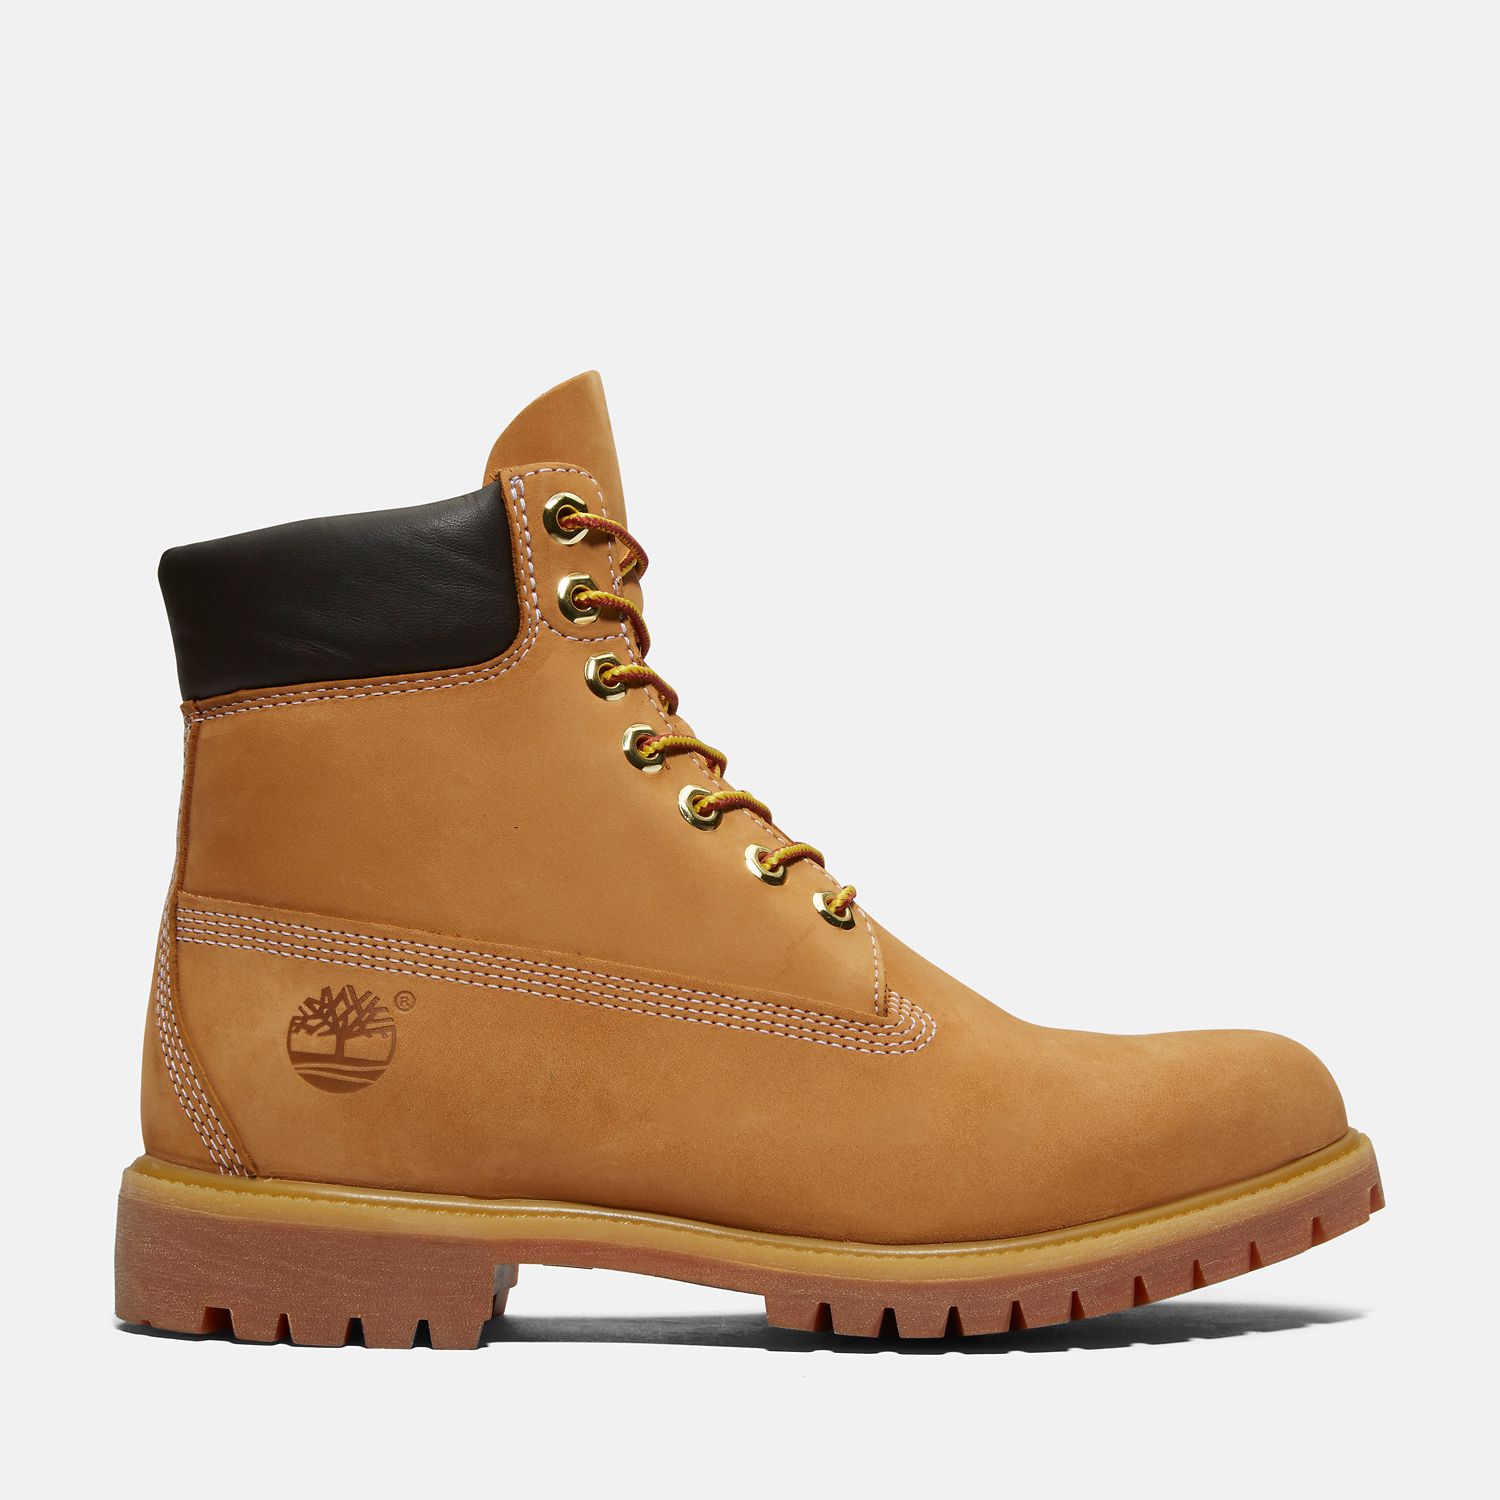 Unlock Wilderness' choice in the Timberland Vs Columbia comparison, the Premium 6-Inch Waterproof Boots by Timberland